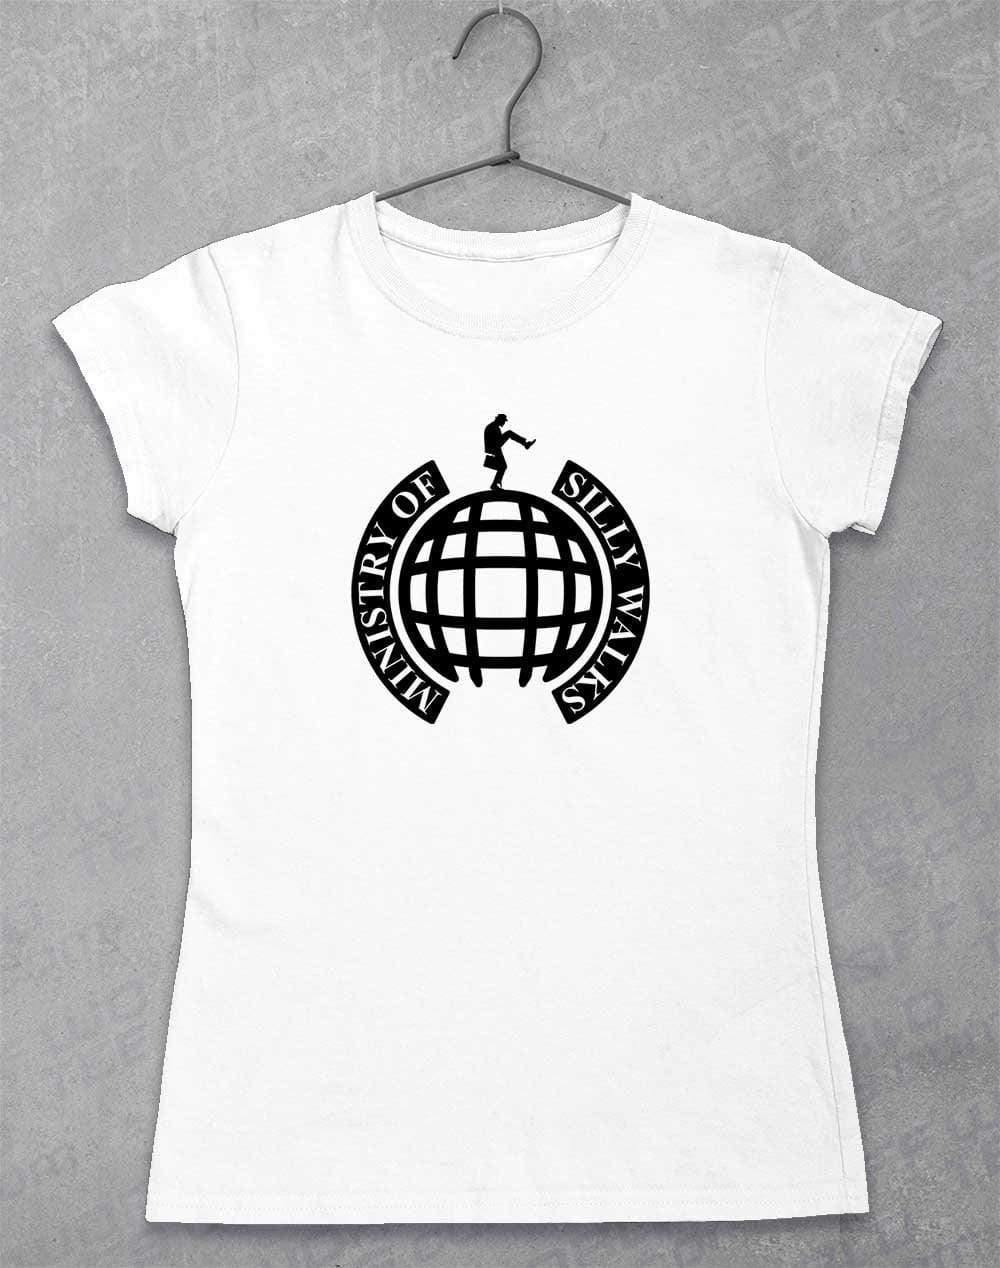 Ministry of Silly Walks Womens T-Shirt 8-10 / White  - Off World Tees